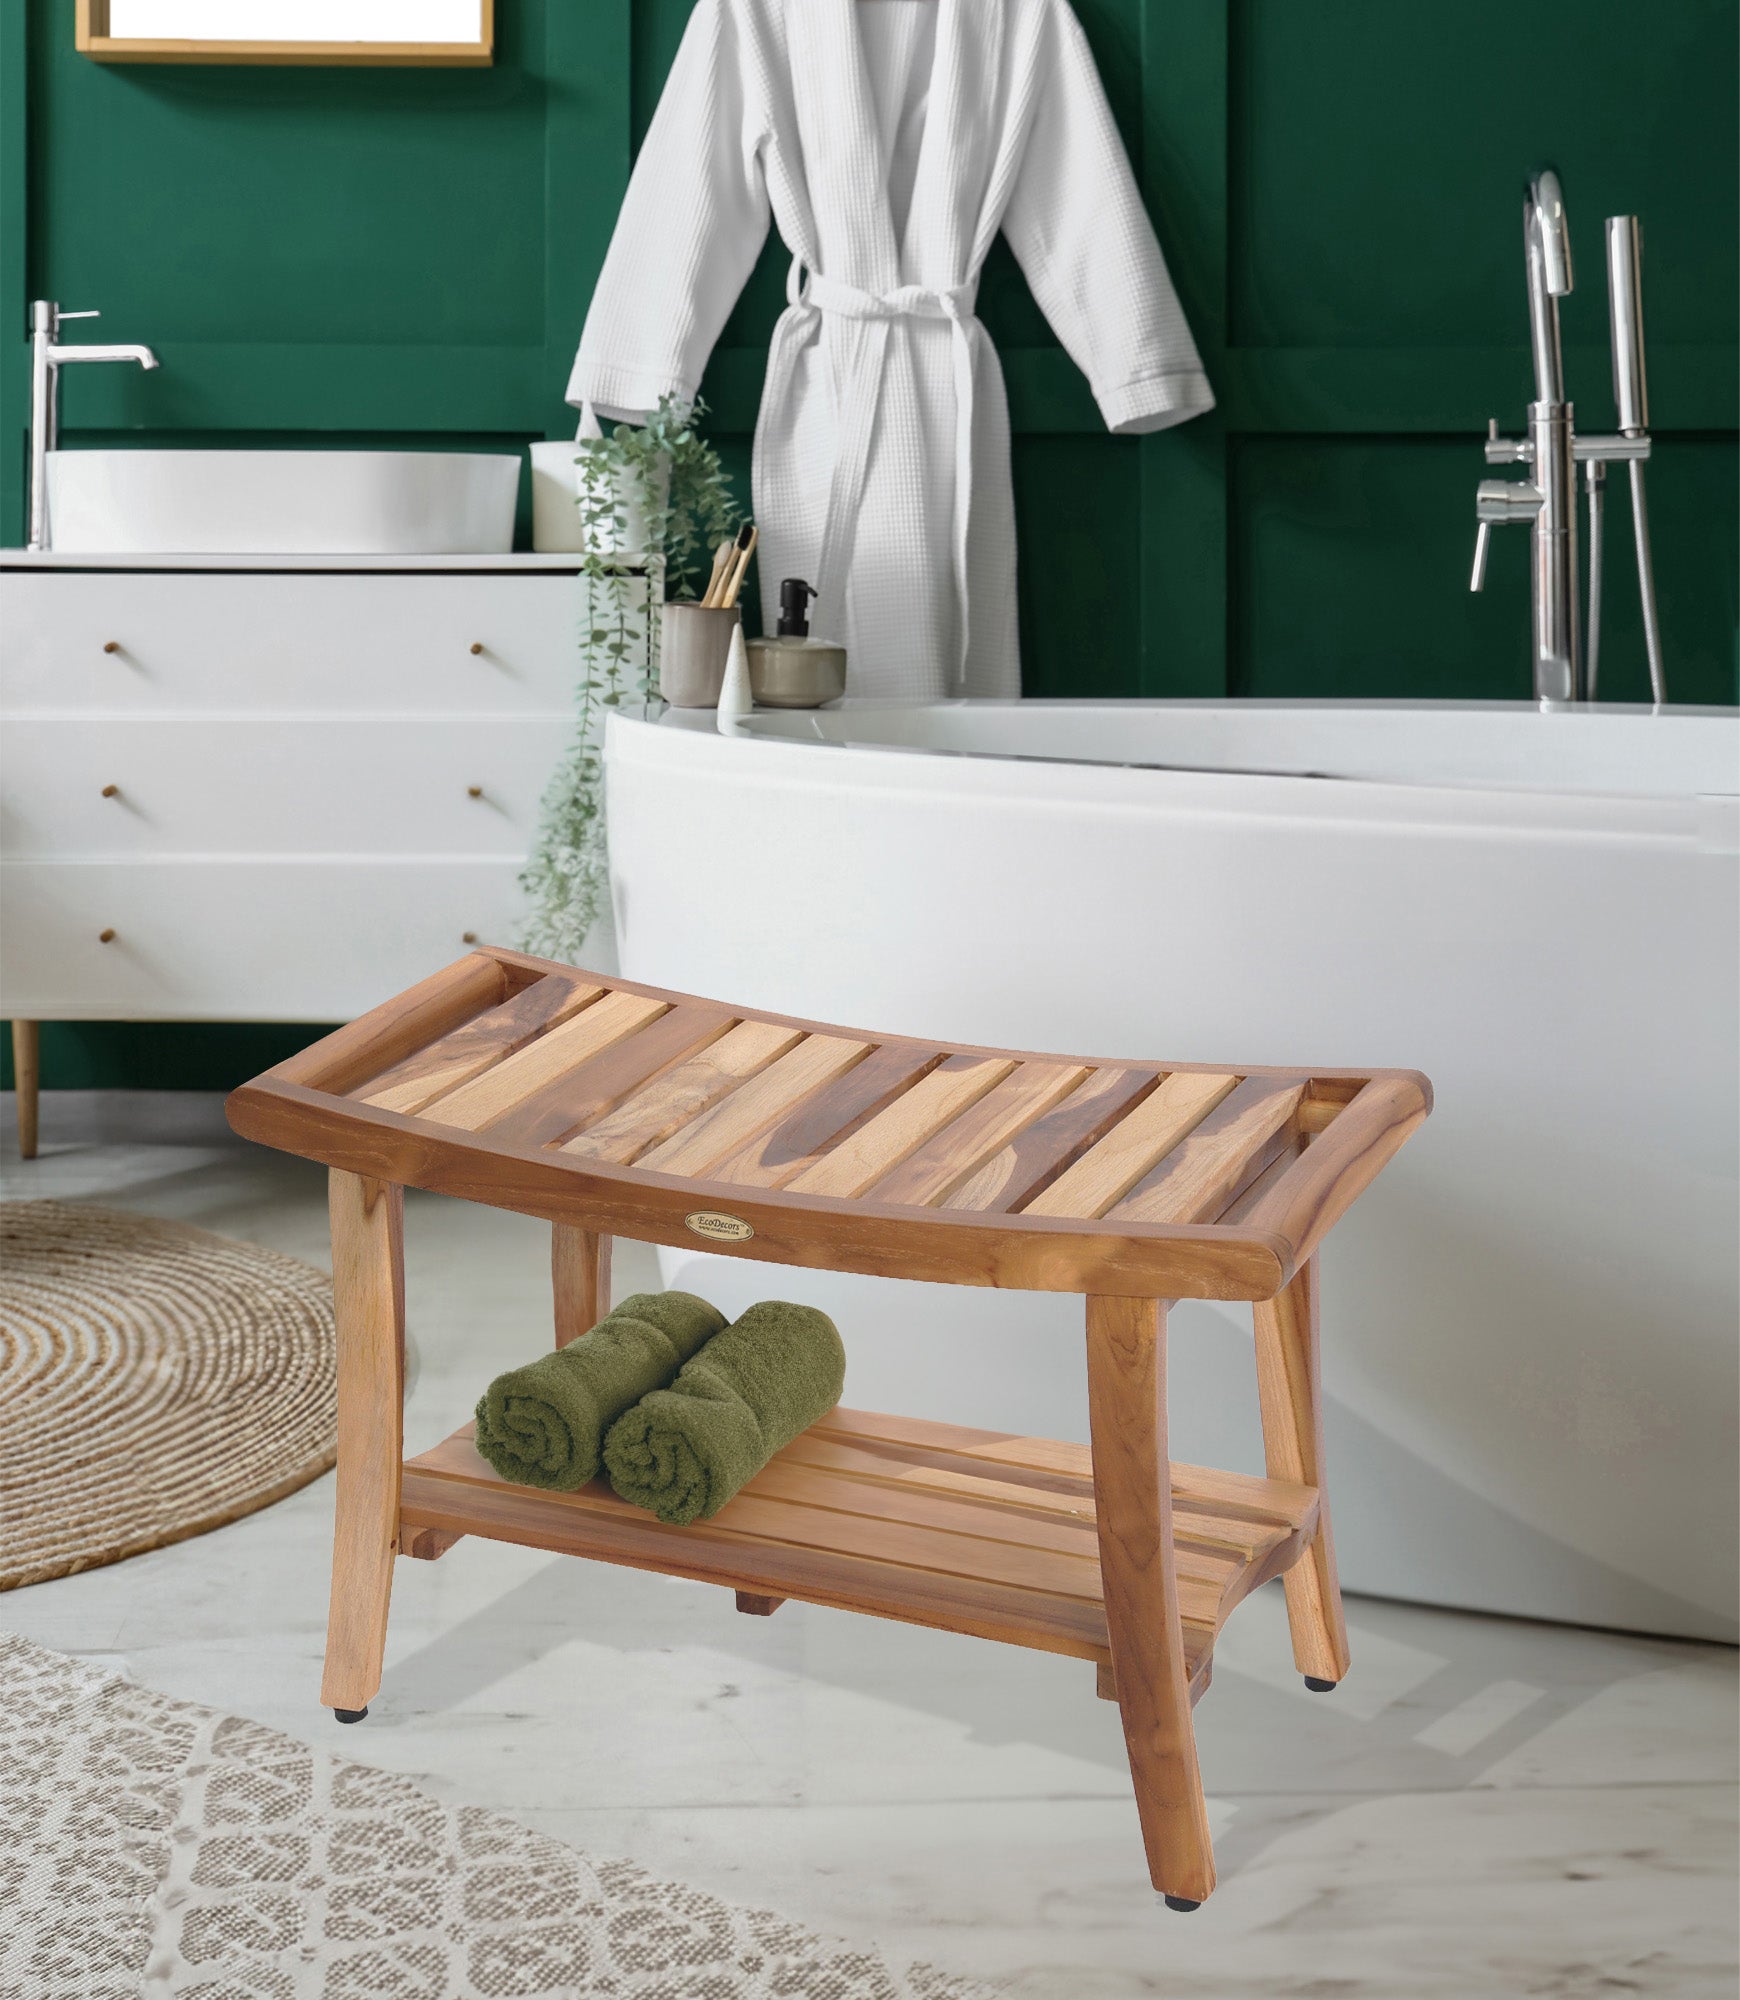 EcoDecors® Harmony® 30" Teak Wood Shower Bench with LiftAide® Arms in EarthyTeak Finish